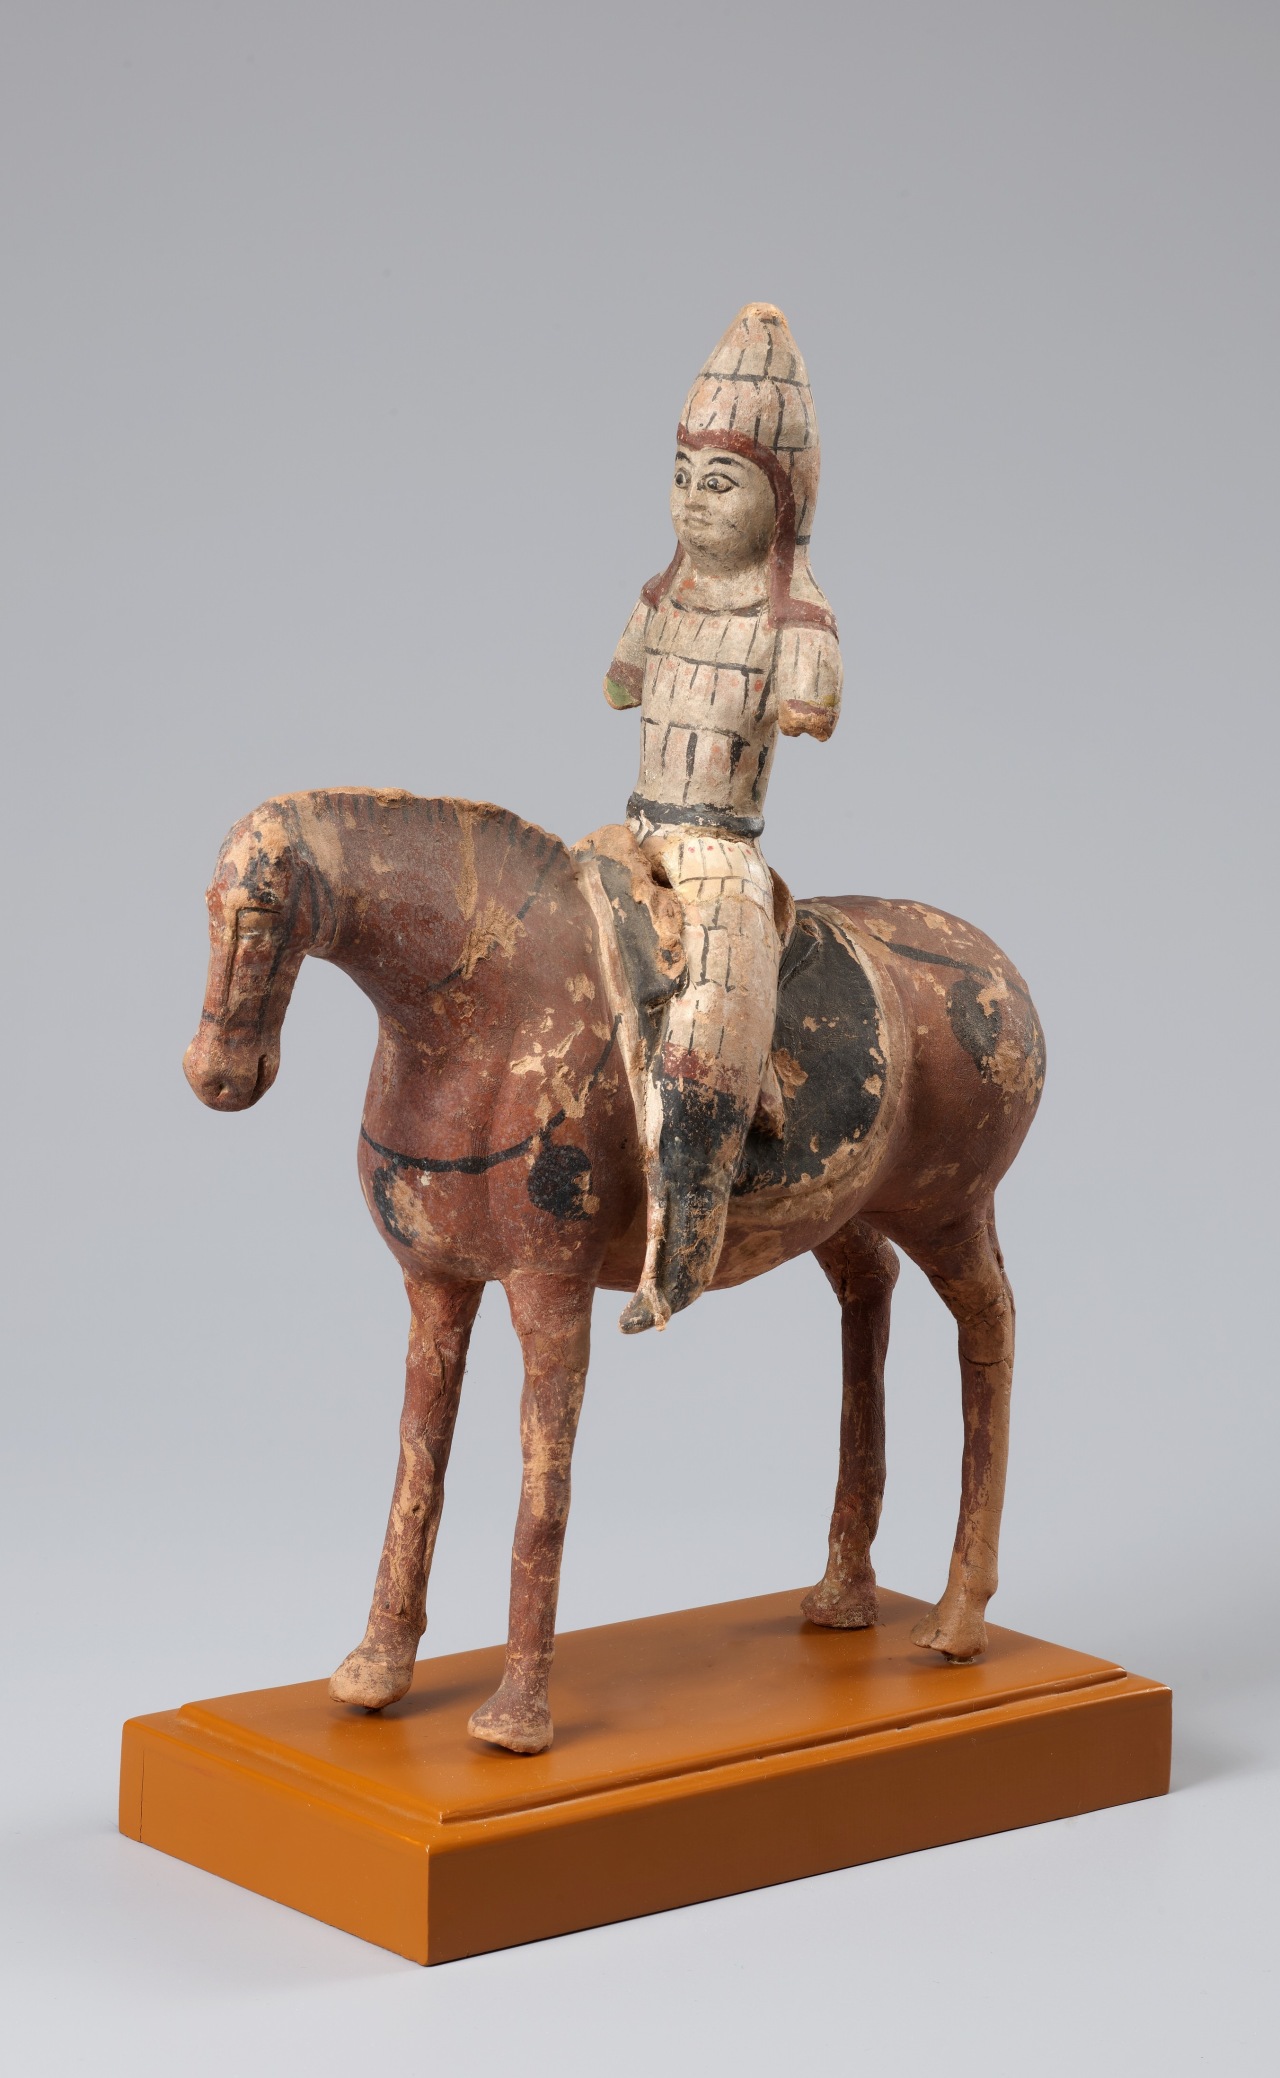 A warrior on a horse figurine estimated to be from around 7-8th century (NMK)